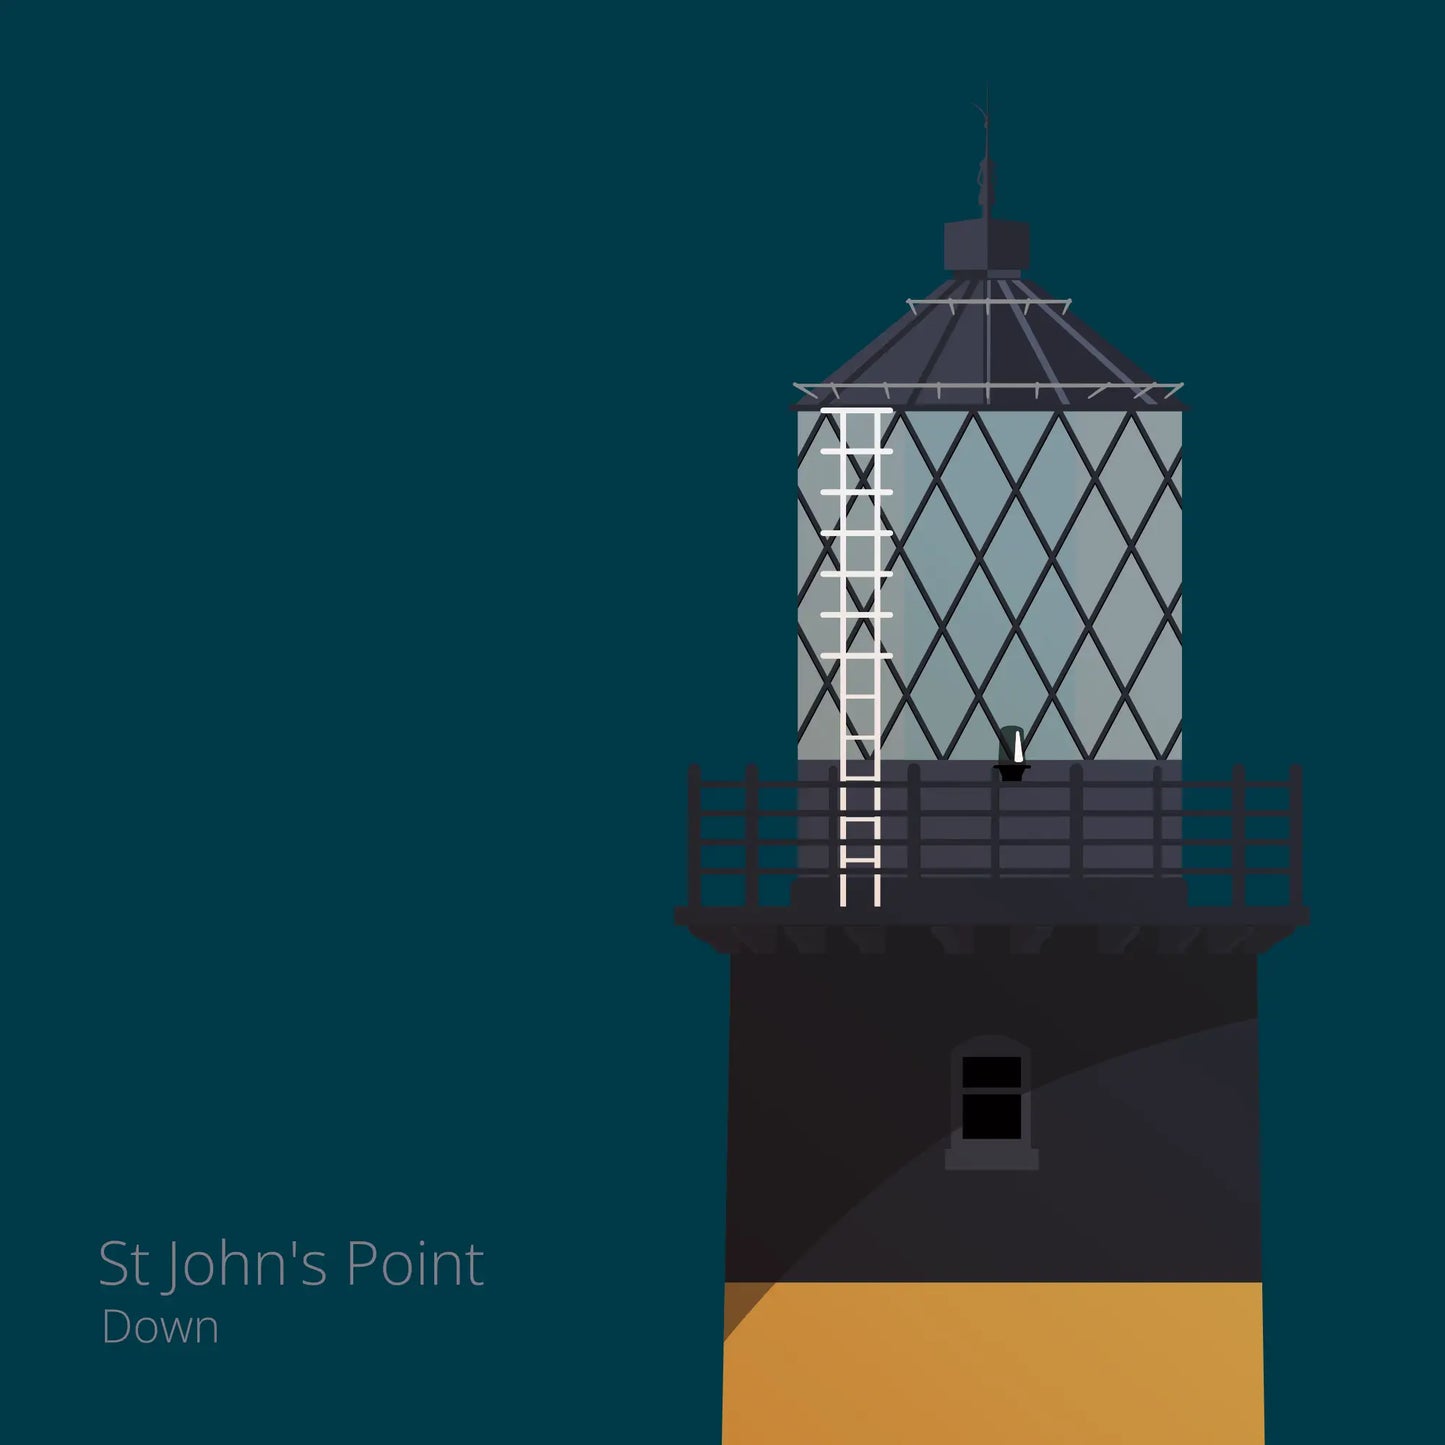 Illustration of St.John's (Down) lighthouse on a midnight blue background